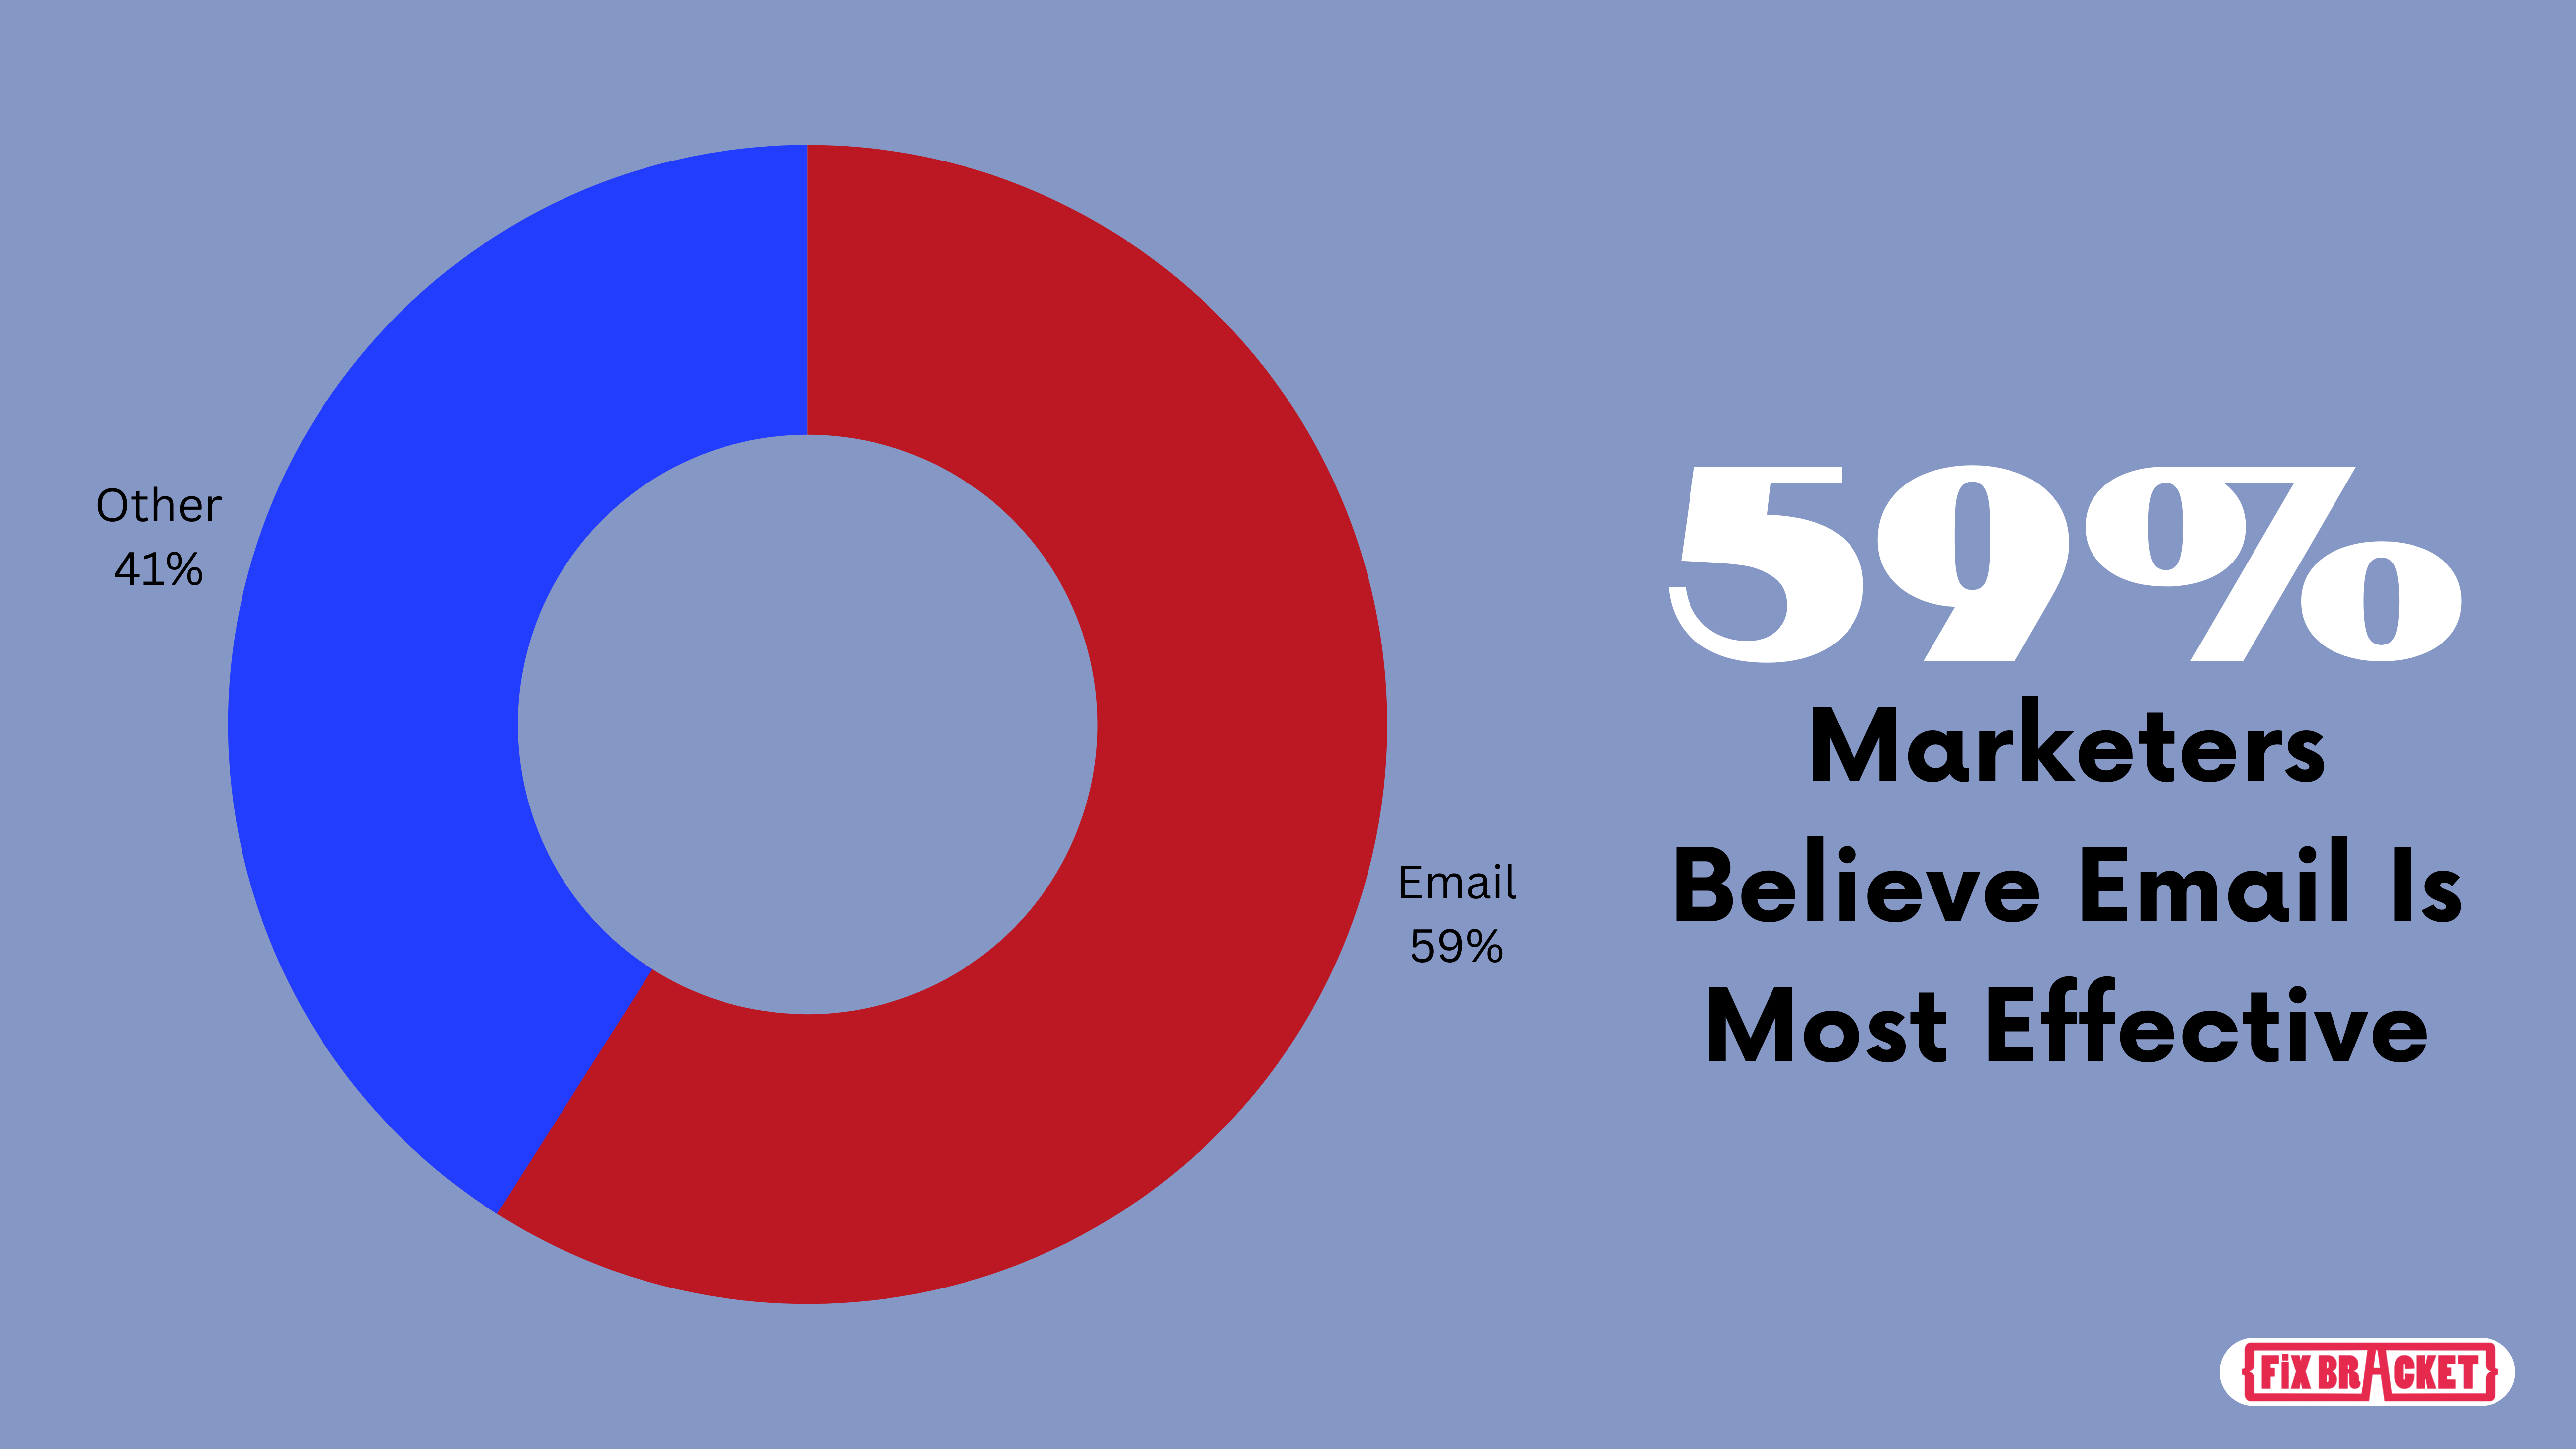 Marketers believe email is most effective